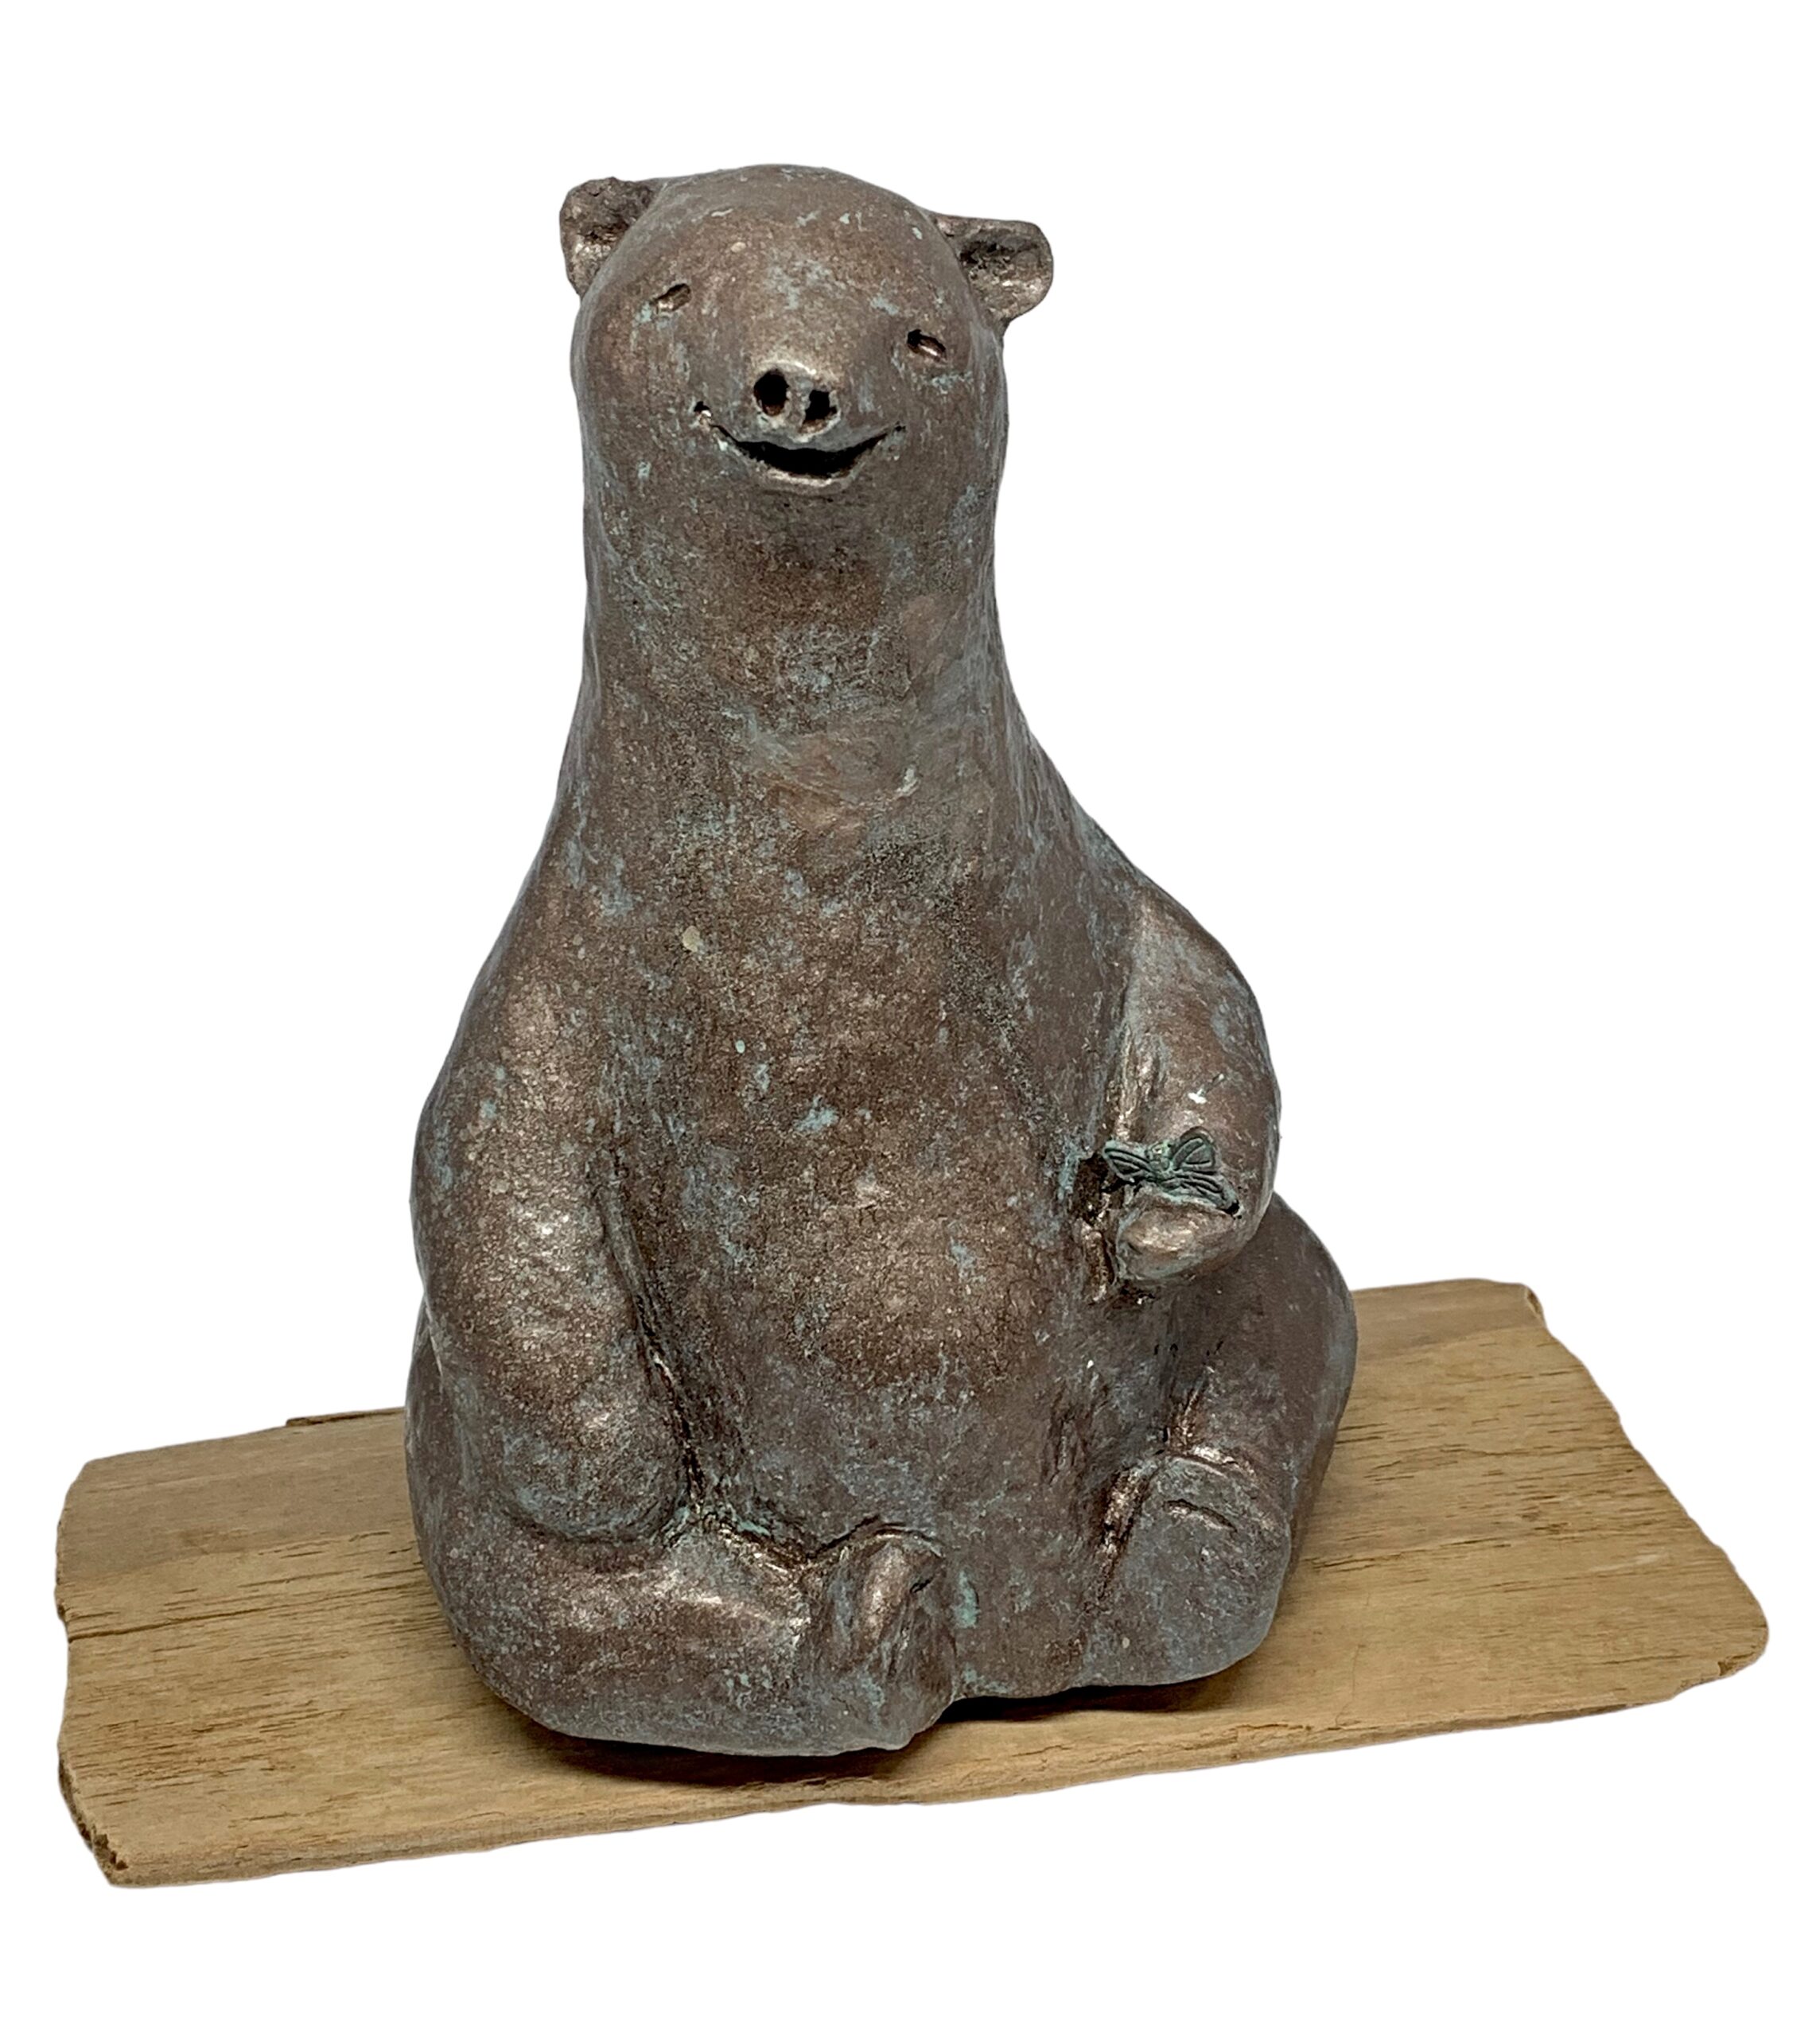 Mixed media sculpture of a bear sitting on a yoga mat by Karin Taylor.